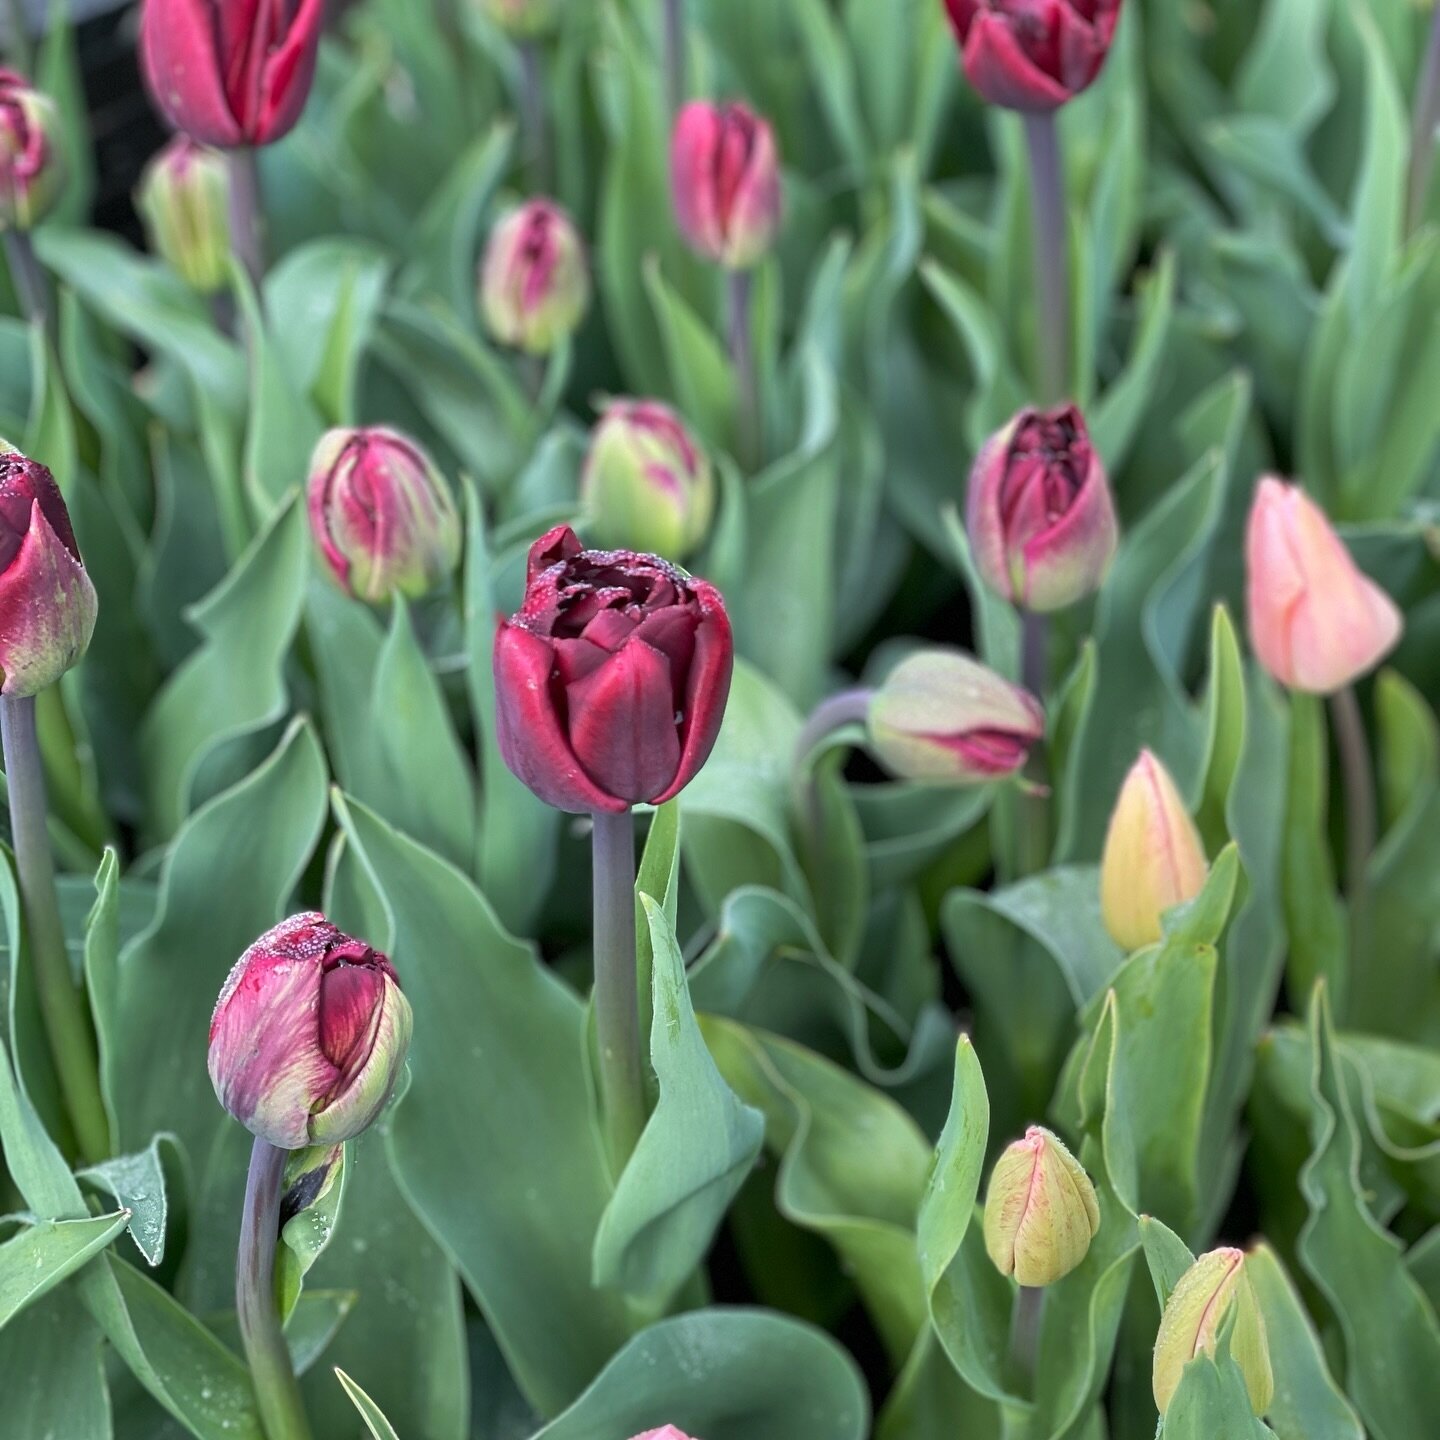 This welcome warm weather is bringing out all our Tulips which means we are going to do a huge pick tomorrow morning. The big double blooms like this beautiful Palmyra, are on their way! 

If you live in Buckinghamshire near Bledlow Ridge, please com